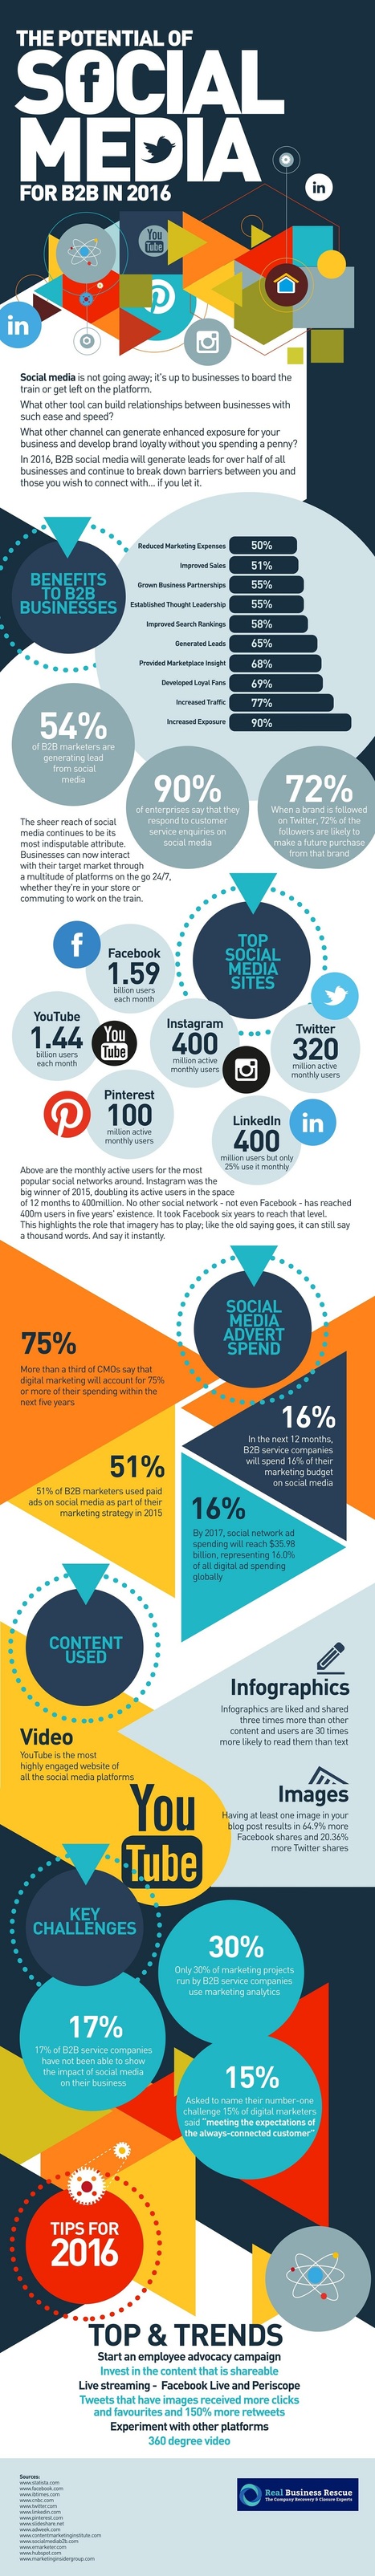 The Potential of Social Media for B2B in 2016 #Infographic | Public Relations & Social Marketing Insight | Scoop.it